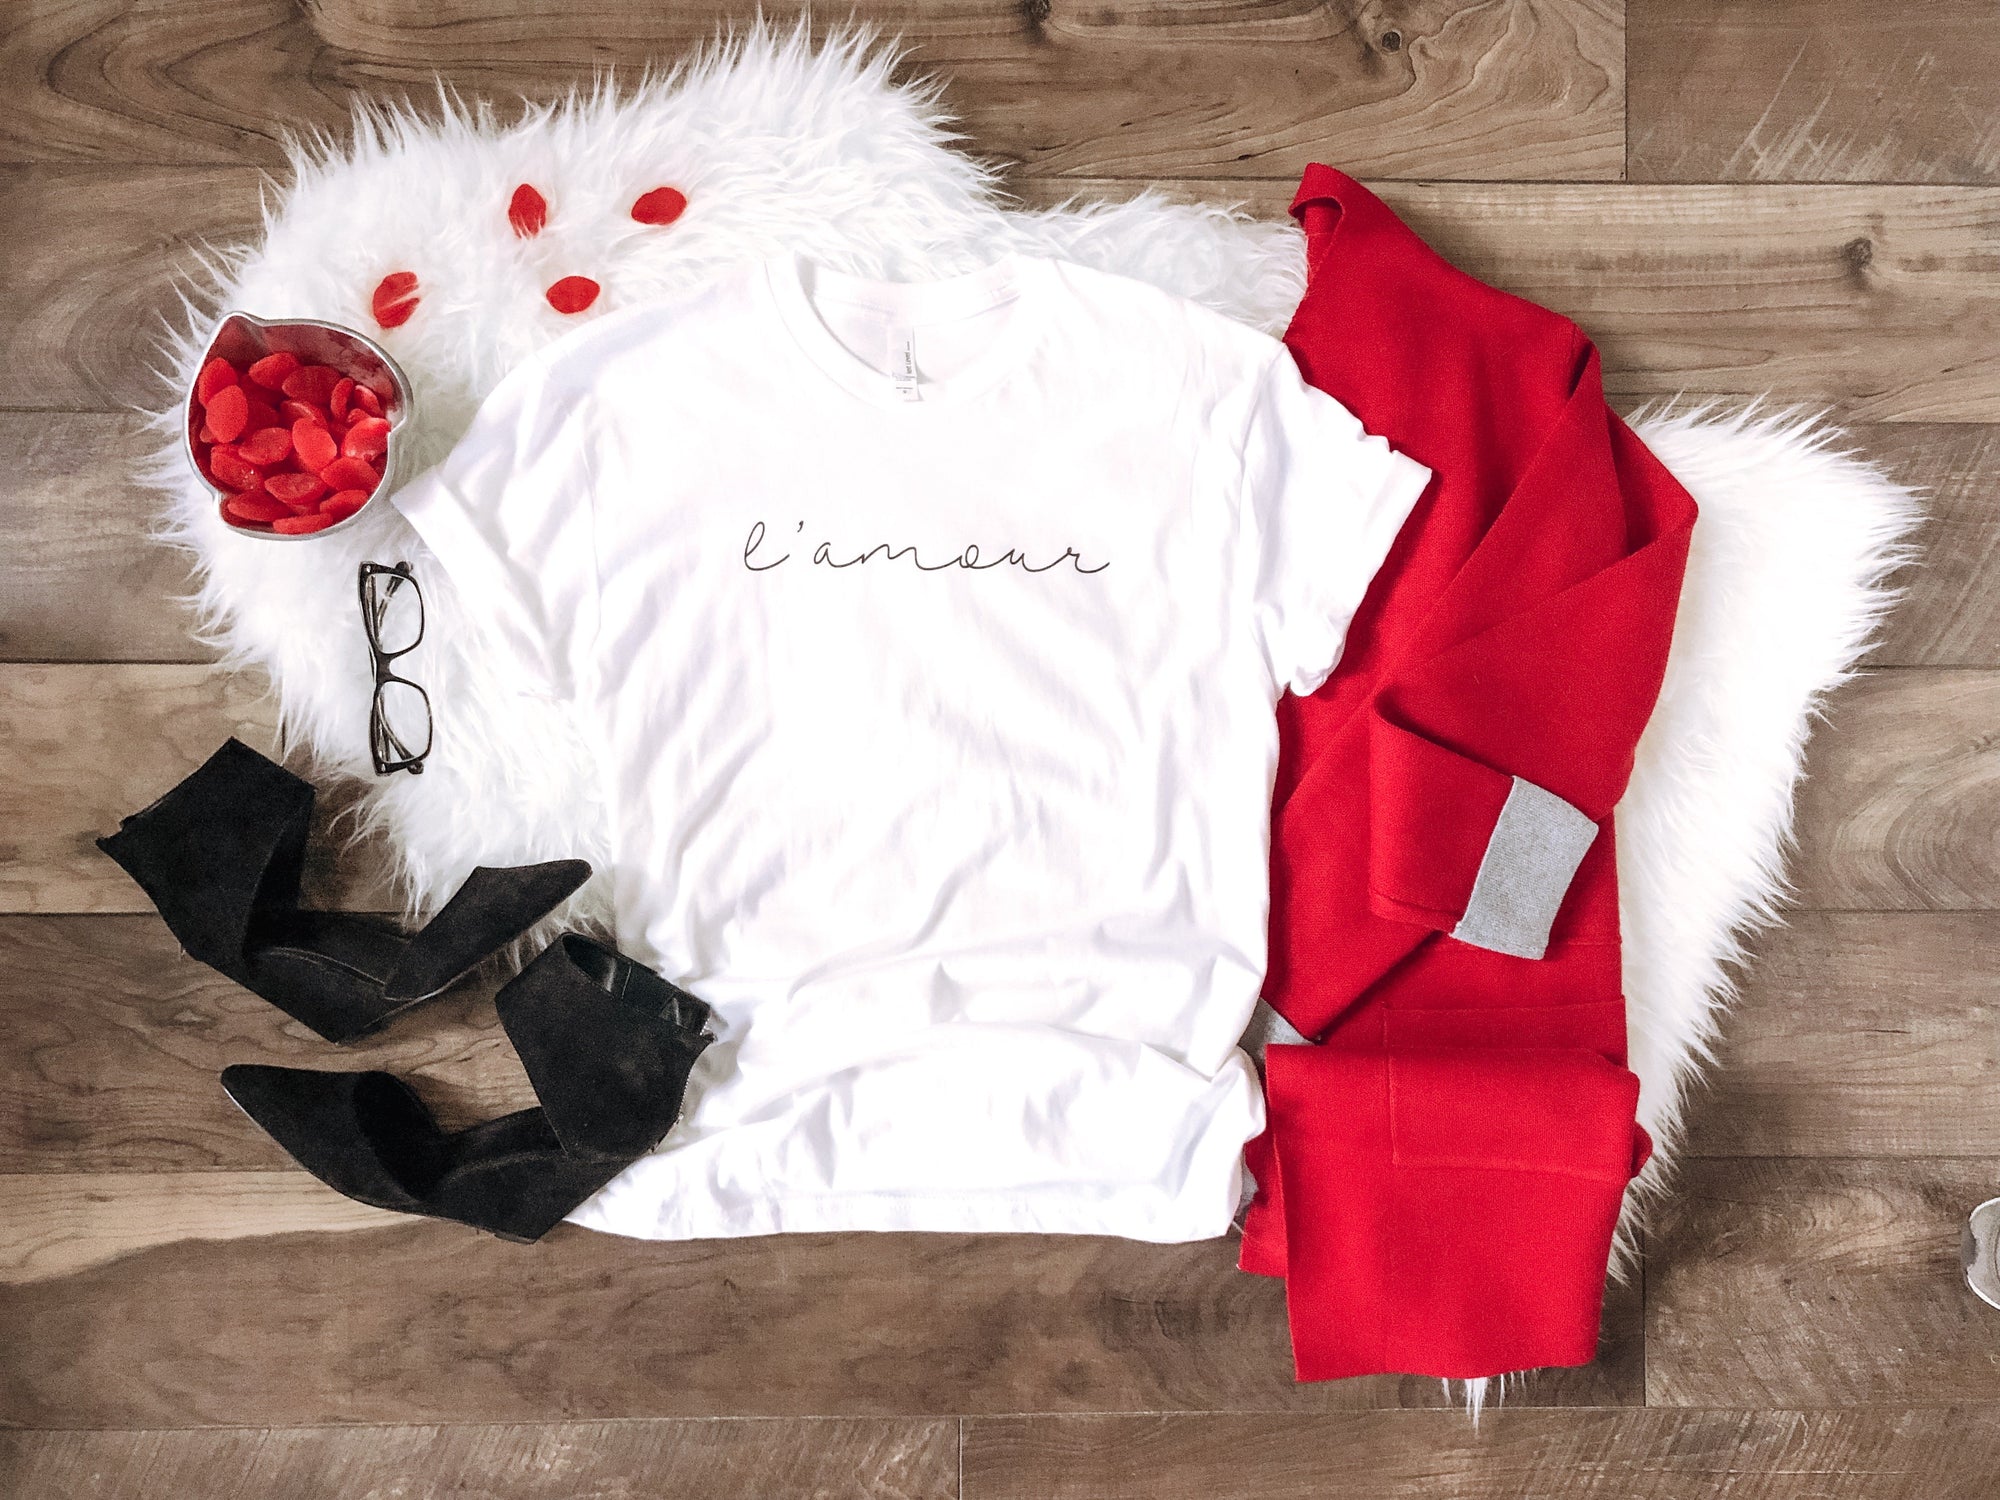 L’amour tee Short sleeve valentines day tee Bella Canvas 3001 white 